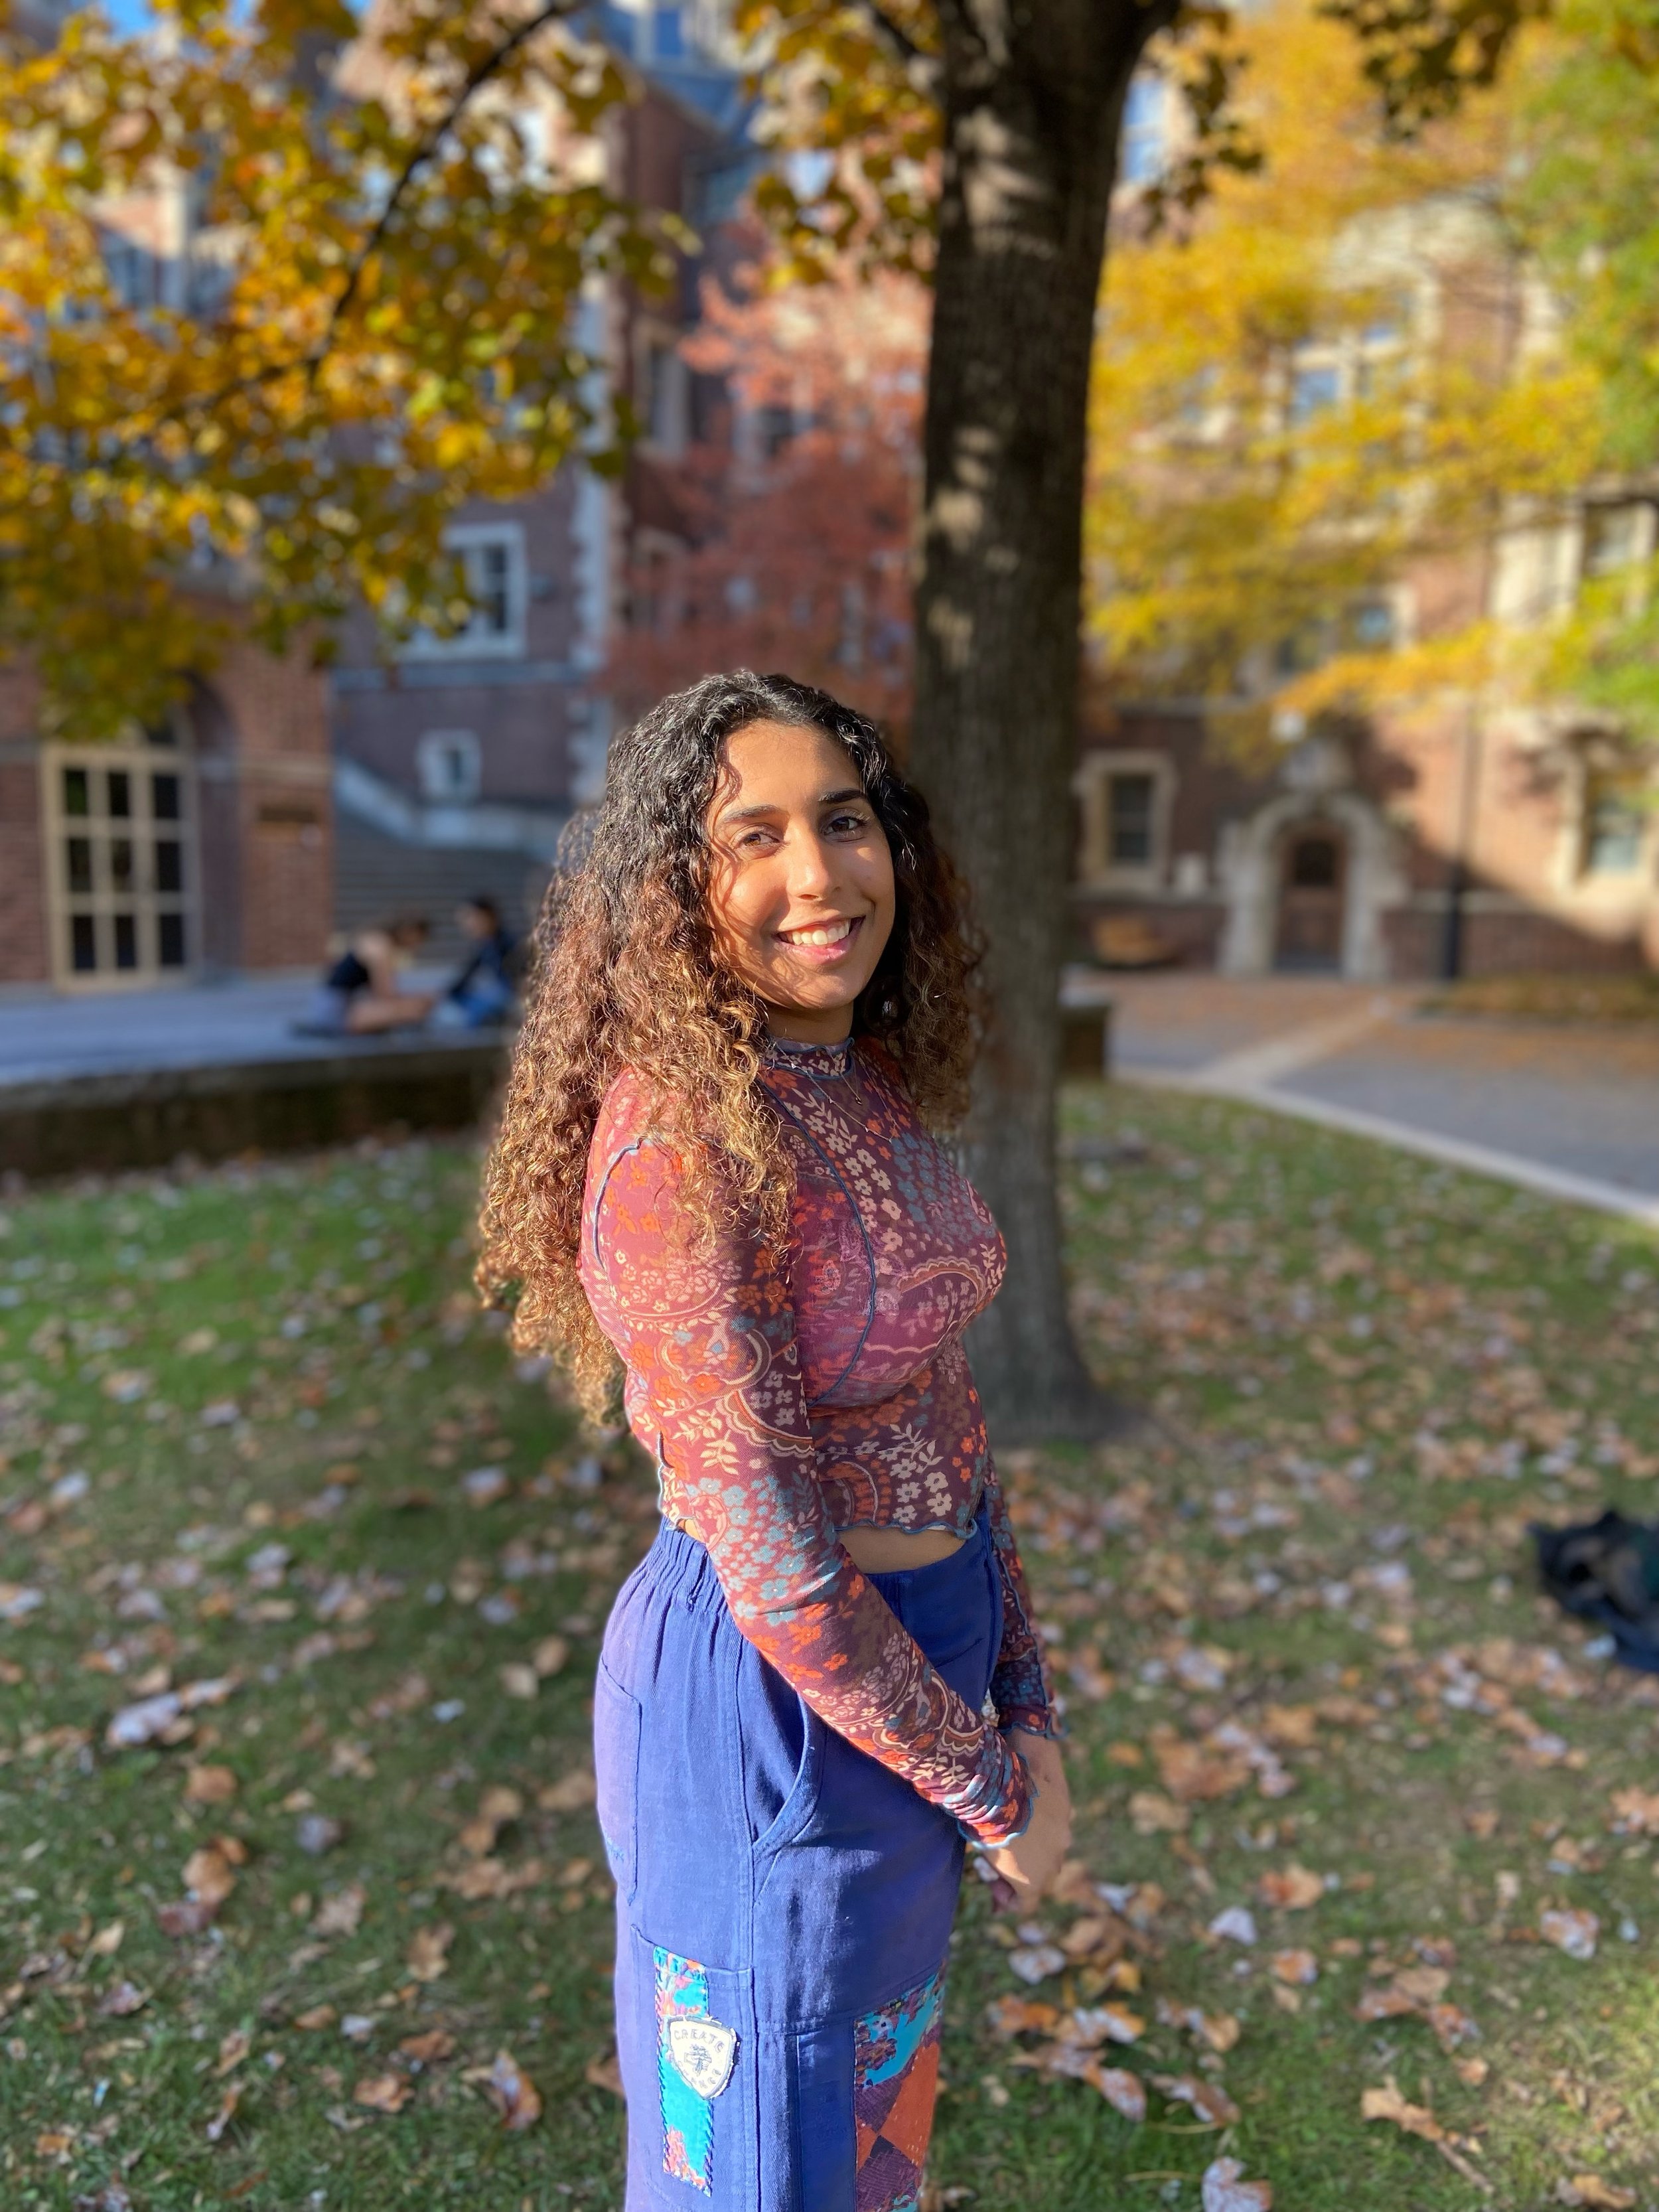 Anusha M, Research and Analysis Intern, University of Pennslyvania